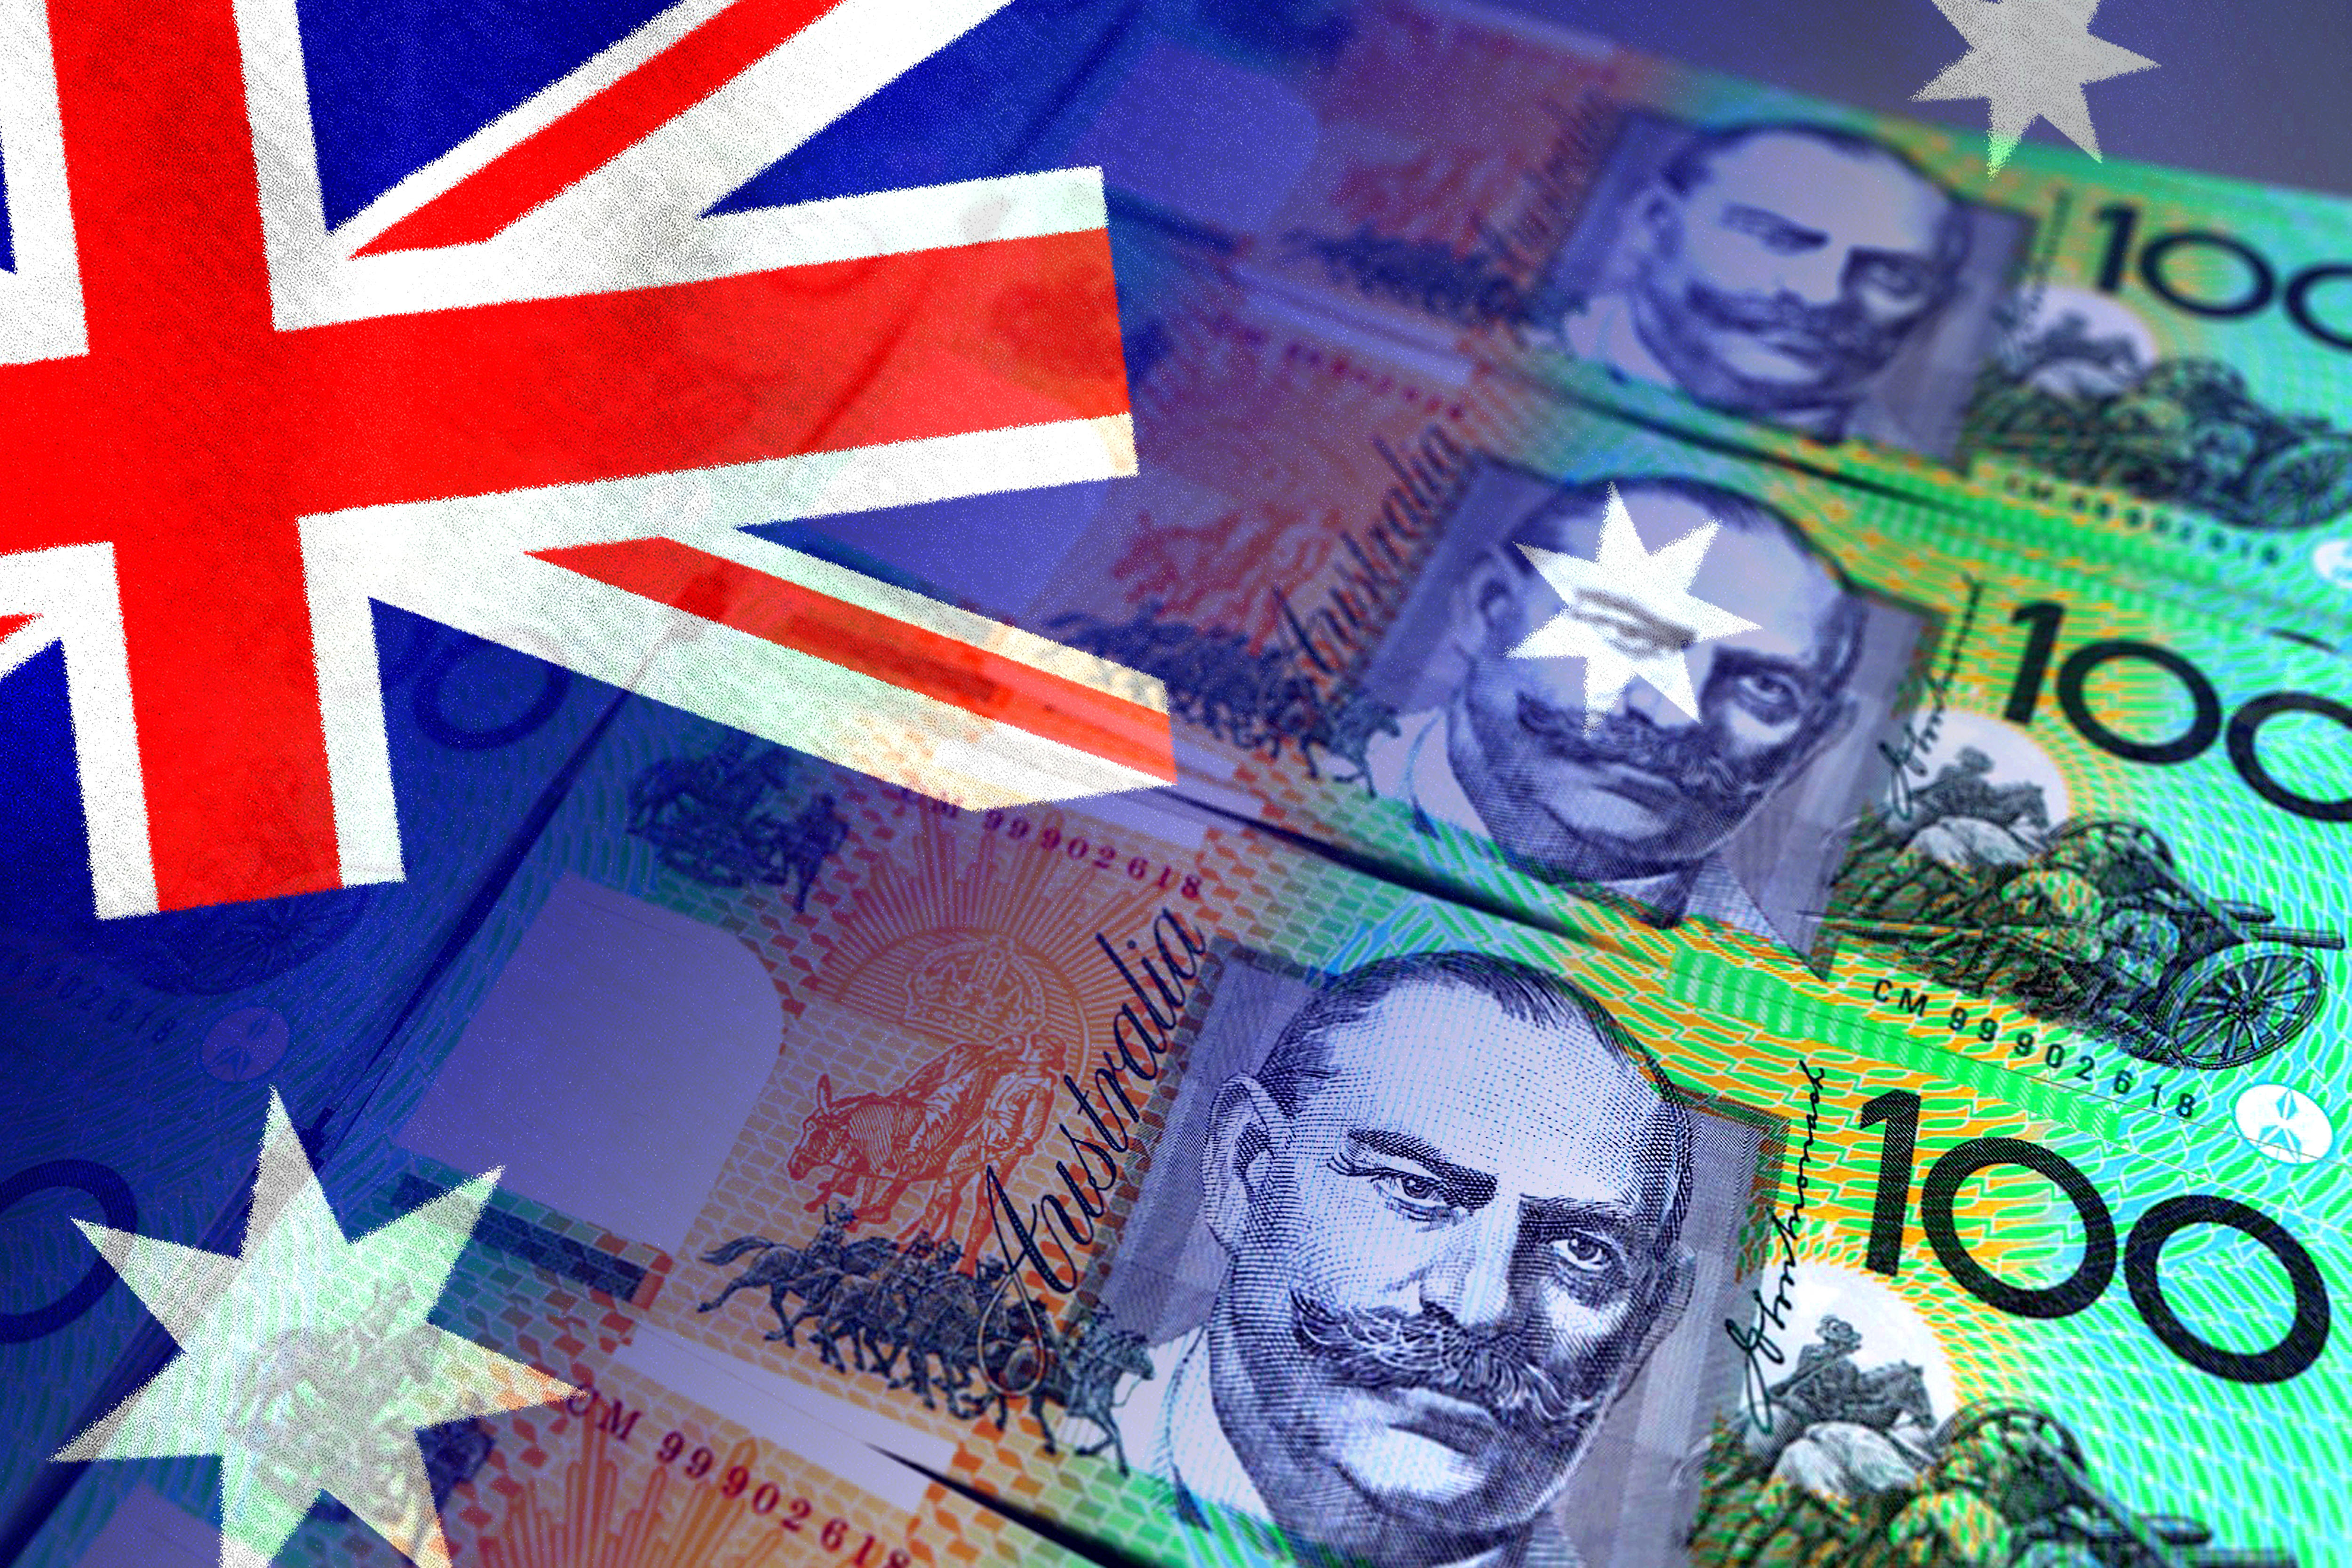 Marking the Treasurer’s work: Three leading economists discuss the federal budget.